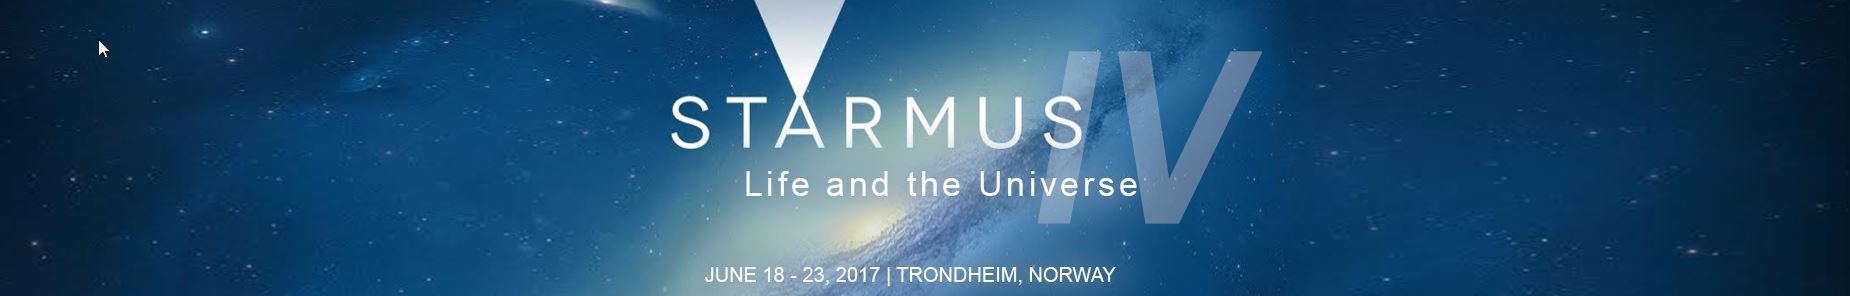 STARMUS – Life and the Universe